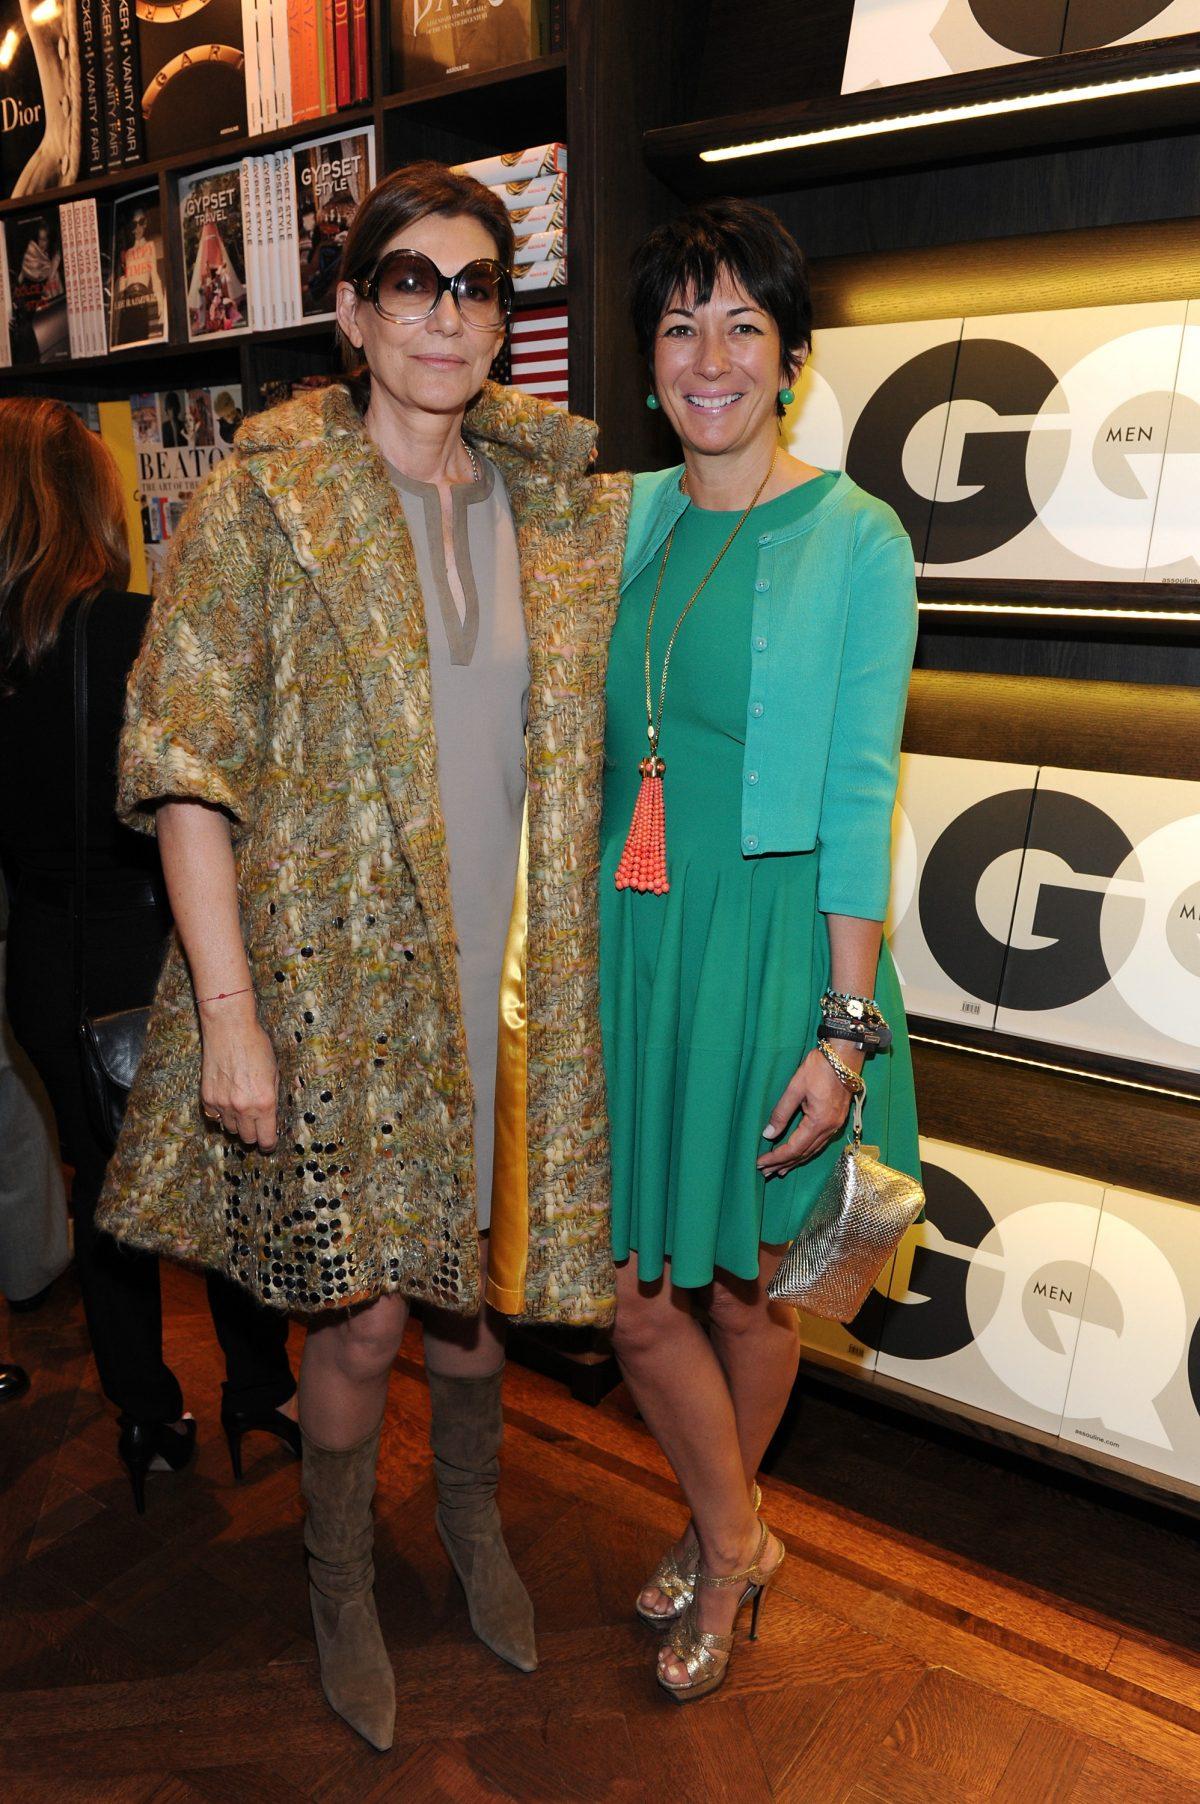 Martine Assouline and Ghislaine Maxwell attend an event at The Plaza in New York City on Oct. 24, 2013. (Craig Barritt/Getty Images for Assouline)